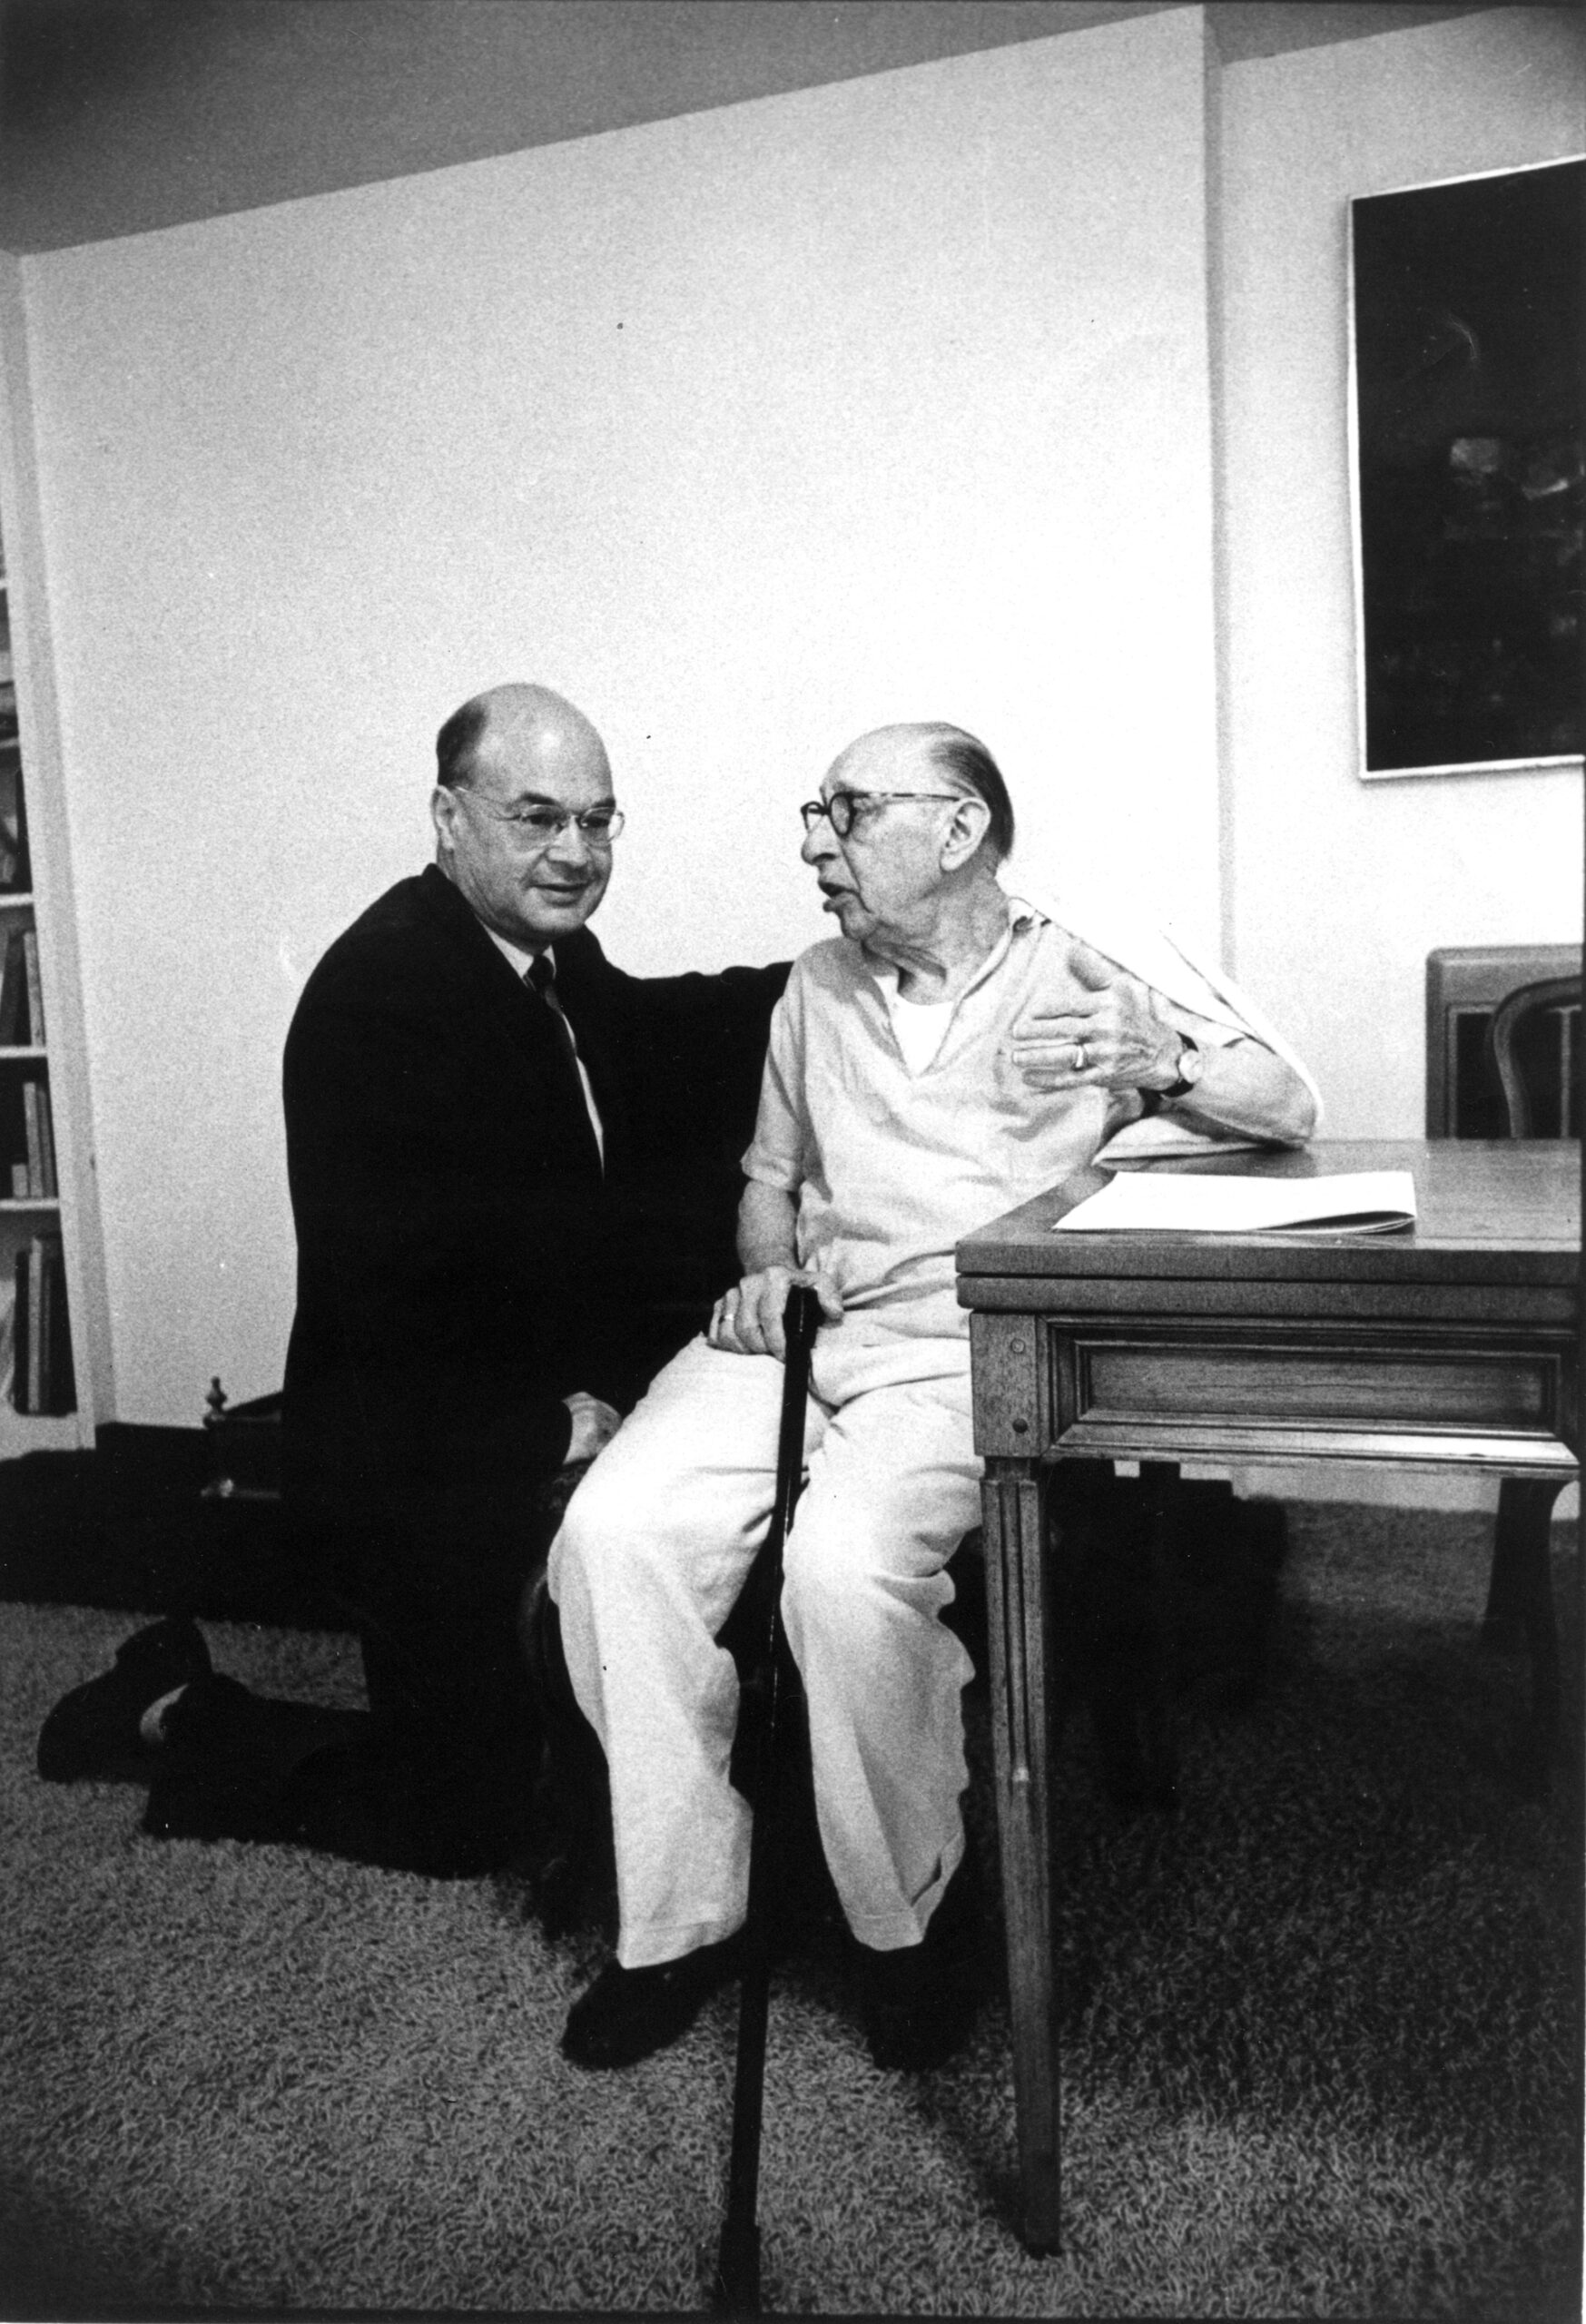 1960s: Professor of Composition Ingolf Dahl chats with Igor Stravinsky.